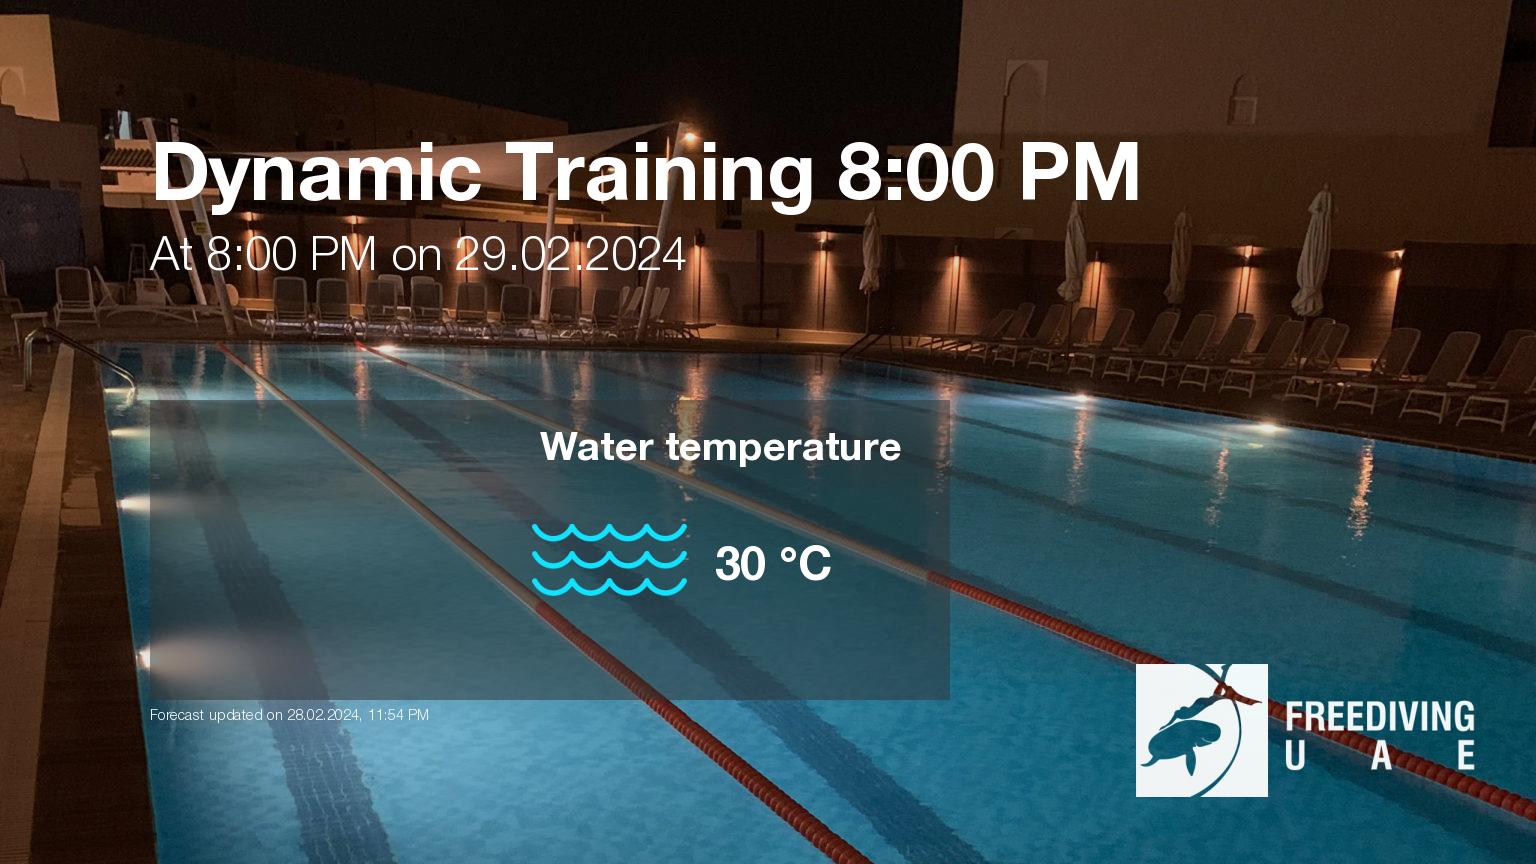 Expected weather during Dynamic Training 8:00 PM on Thu, Feb 29, at 8:00 PM